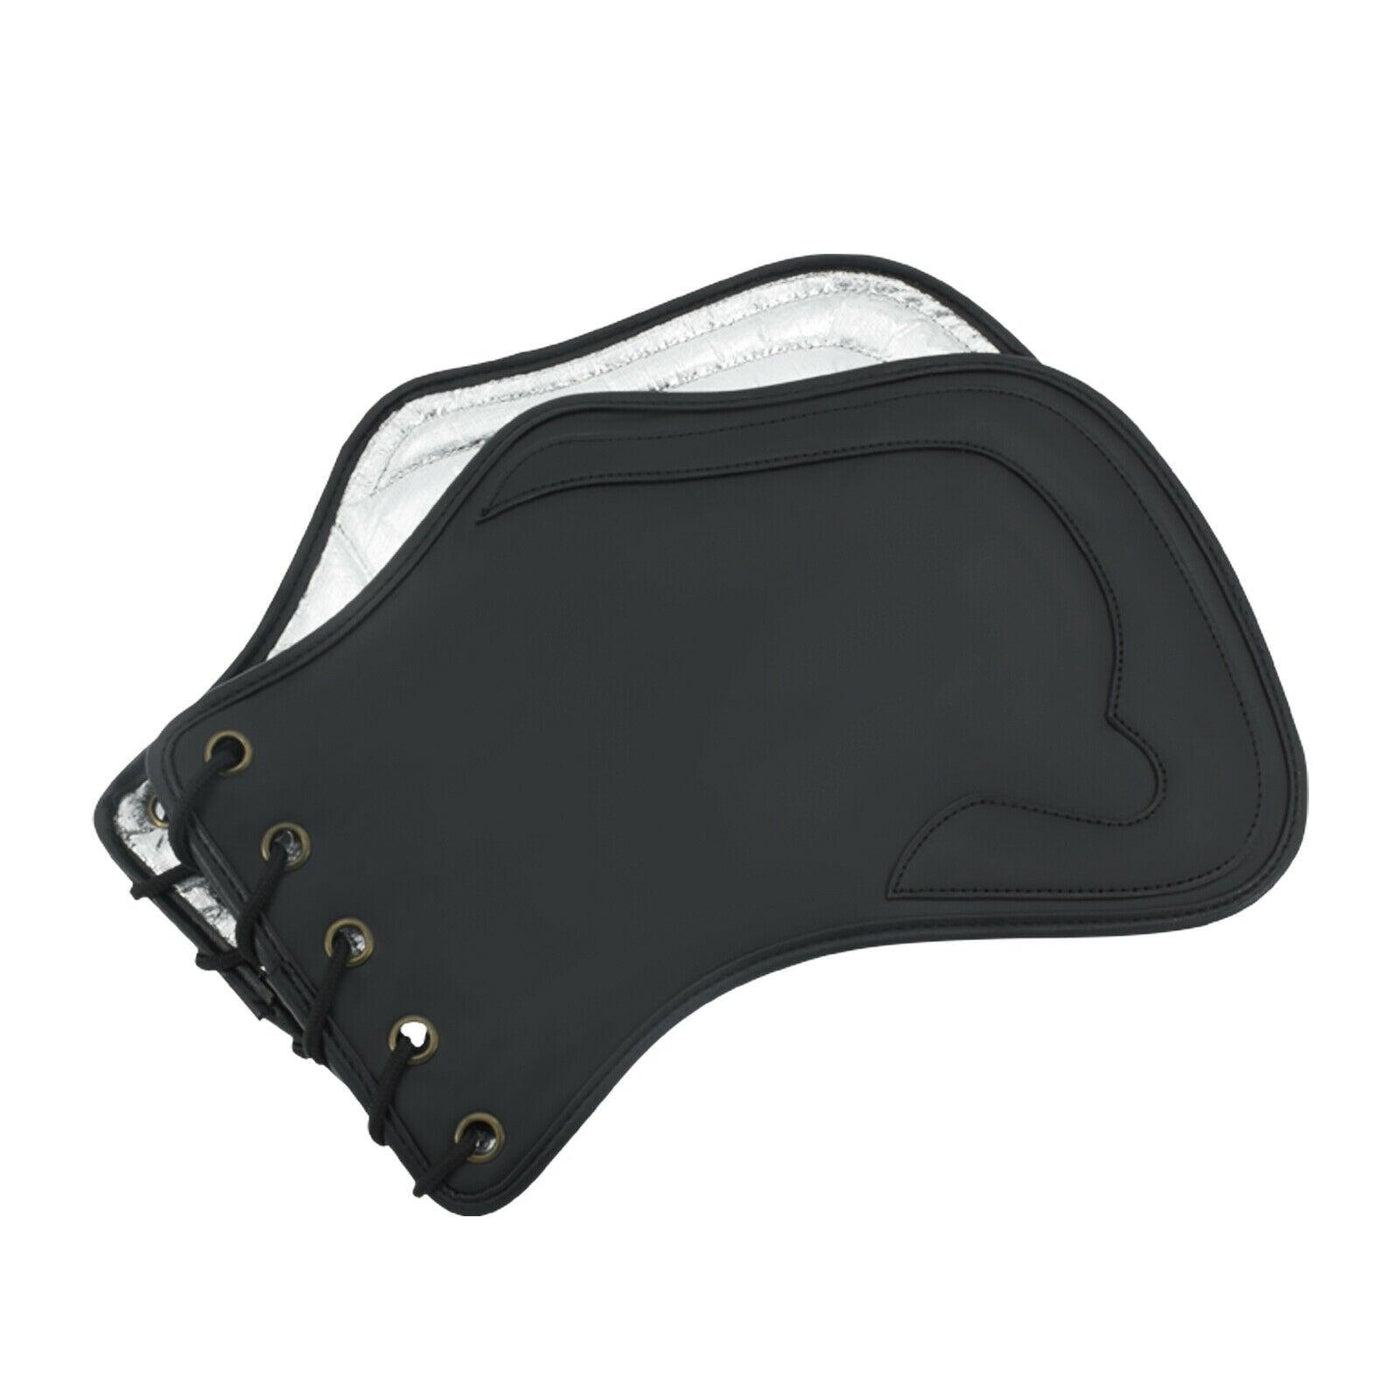 1x Motorcycle Black Heat Saddle Shield Deflectors Fit For Harley Sportster Dyna - Moto Life Products